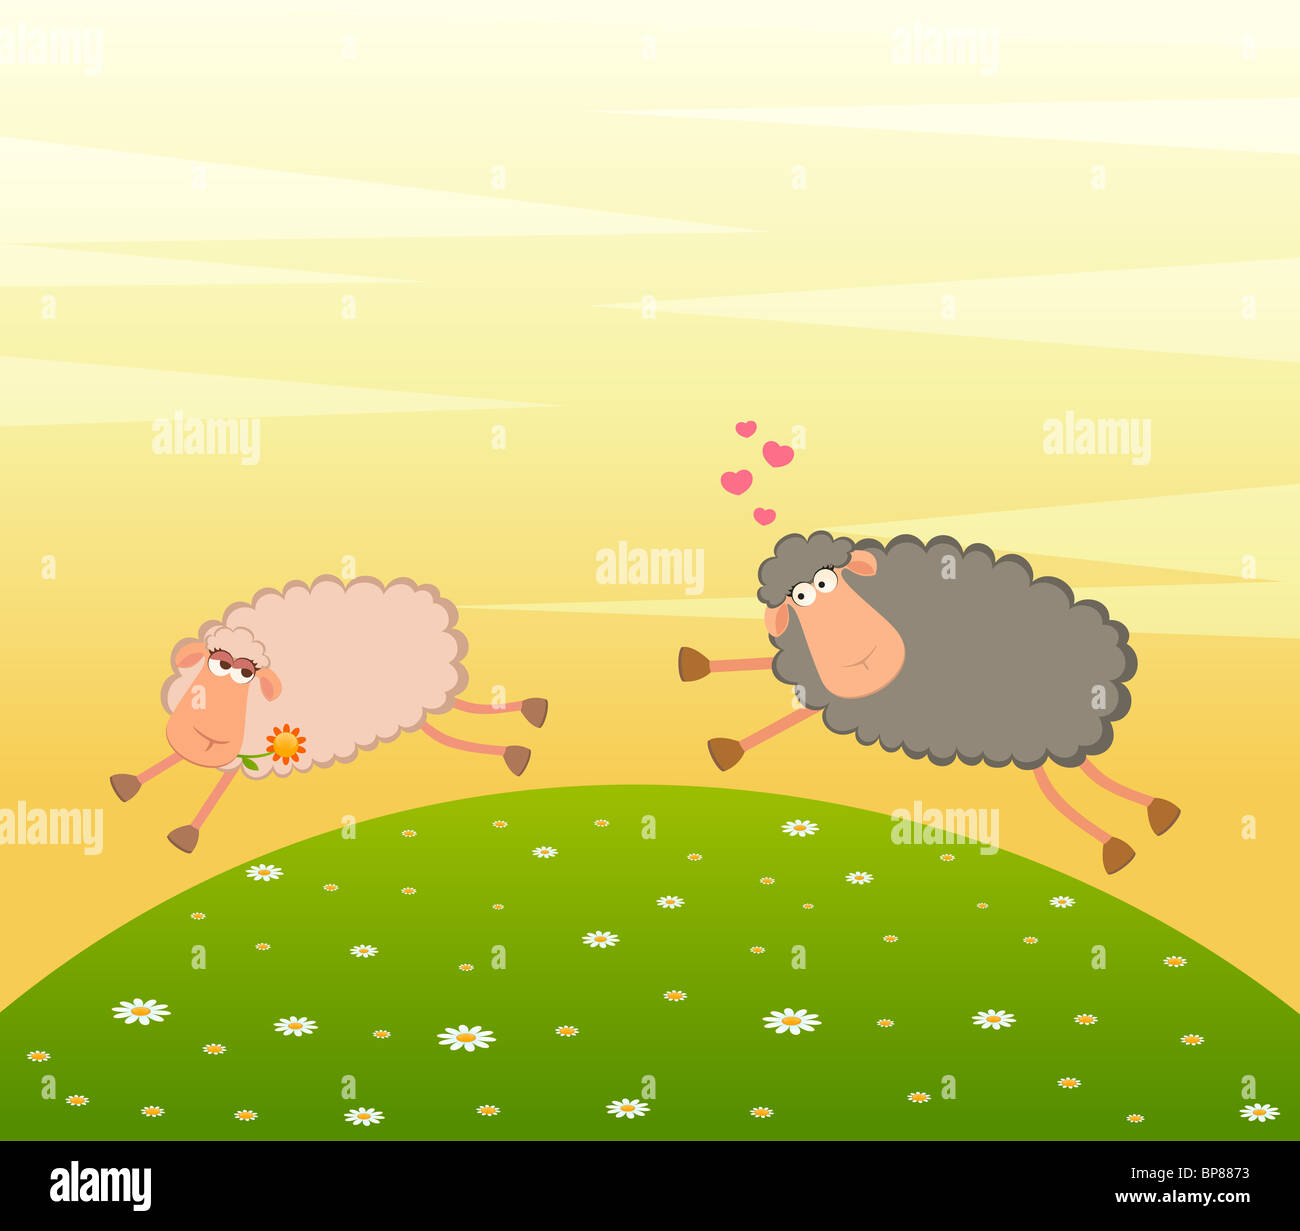 Landscape background with cartoon in love sheep pursues after other Stock Photo